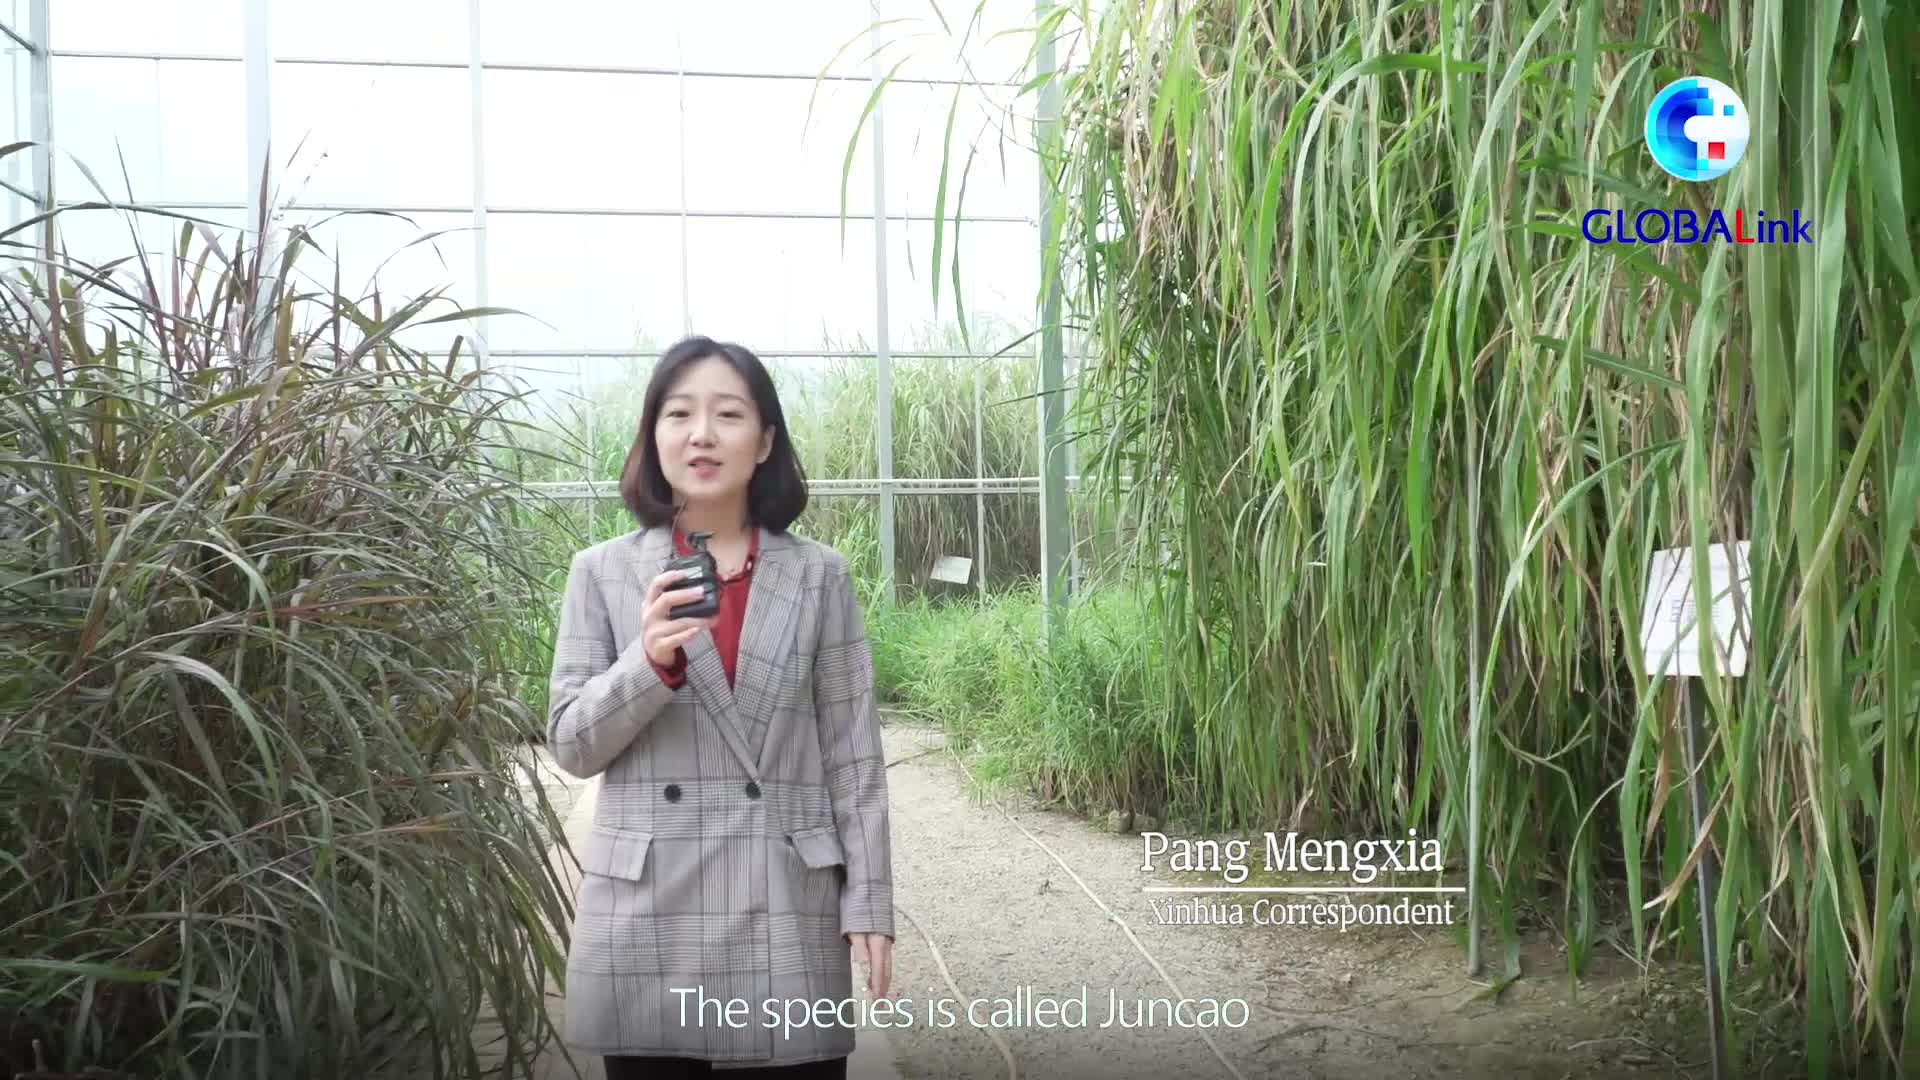 GLOBALink | How does China's "magic grass" benefit the world?